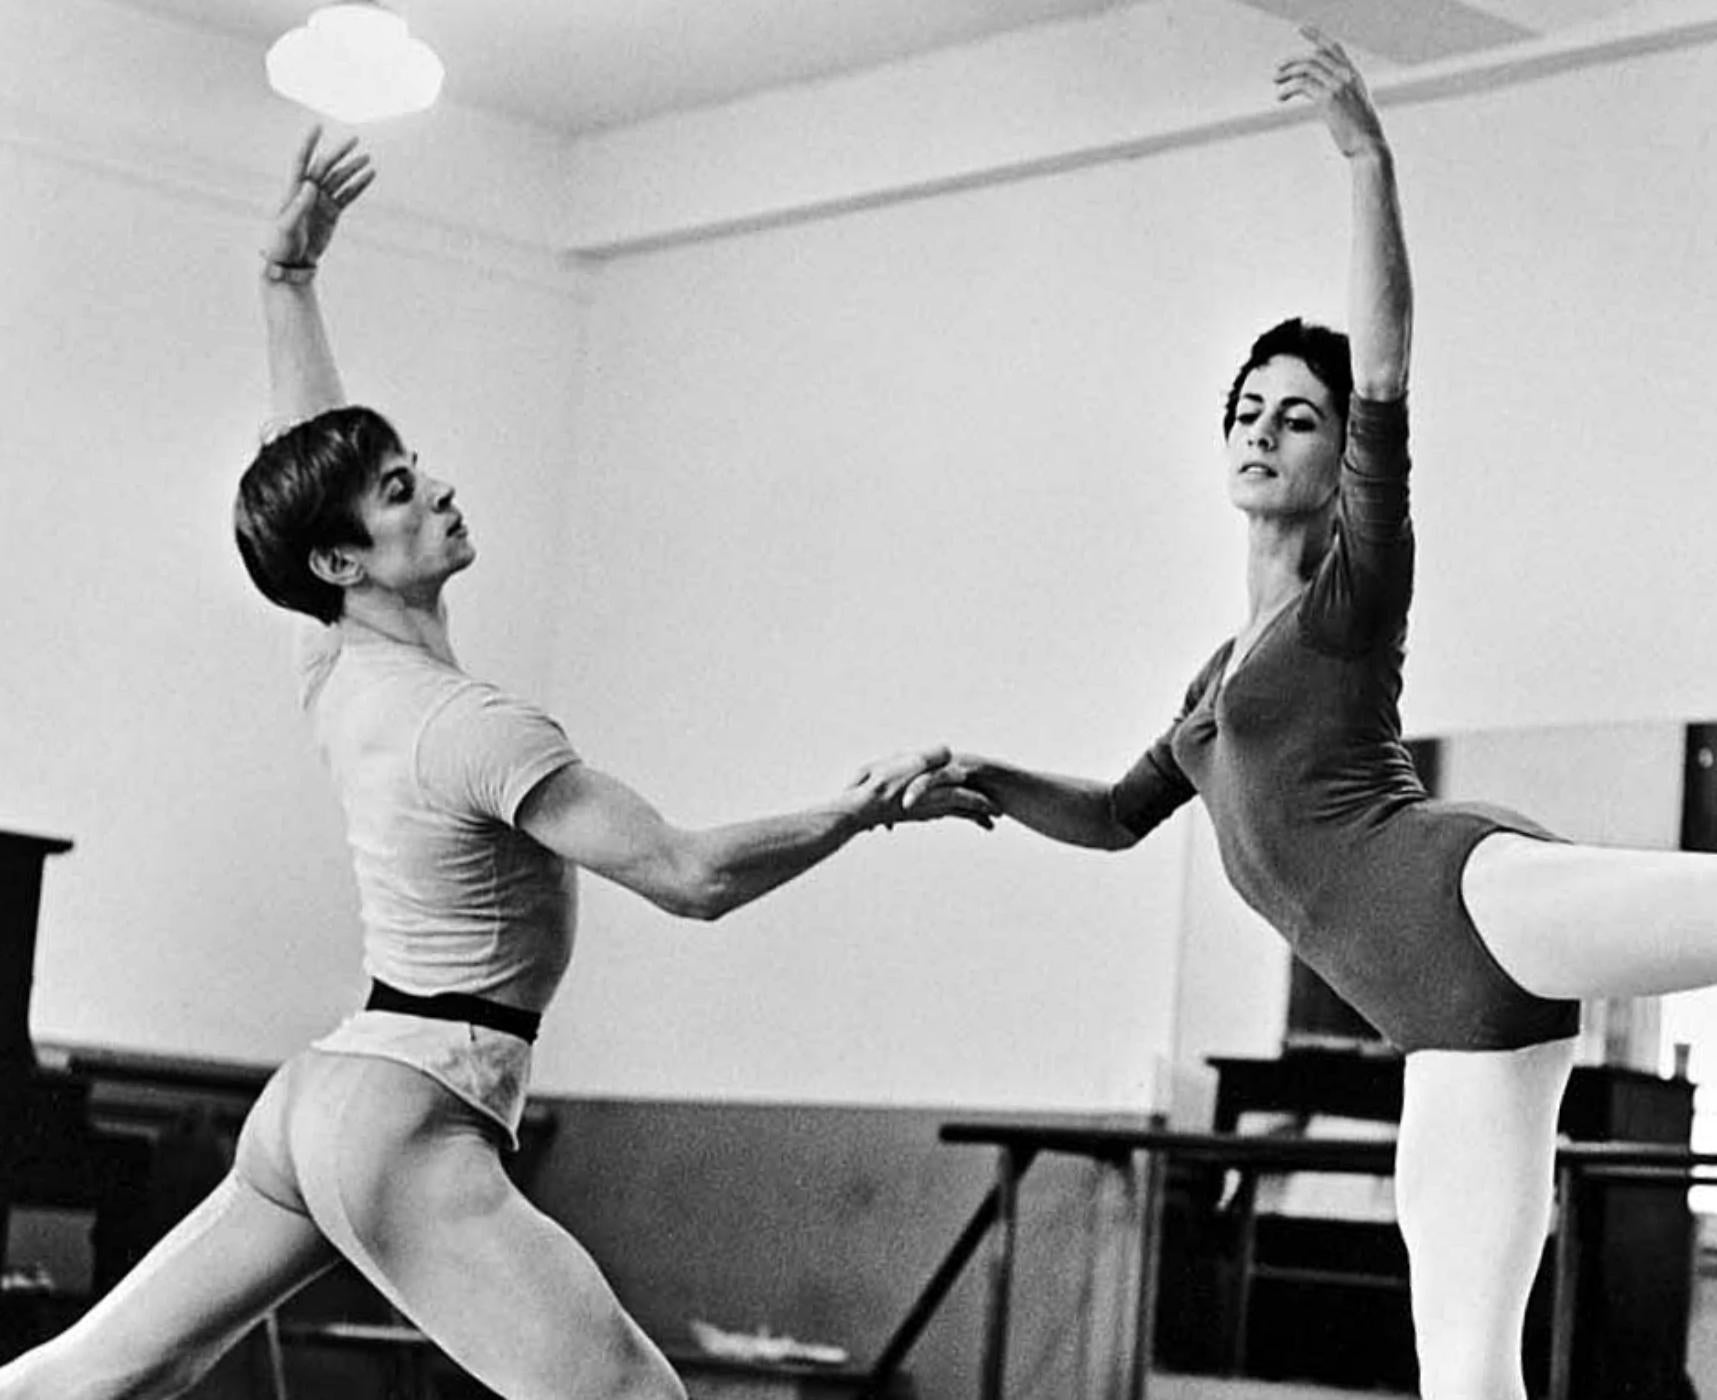 ABT  Dancer Lupe Serrano & Rudolph Nureyev Rehearsing for Television, Signed - Photograph by Jack Mitchell